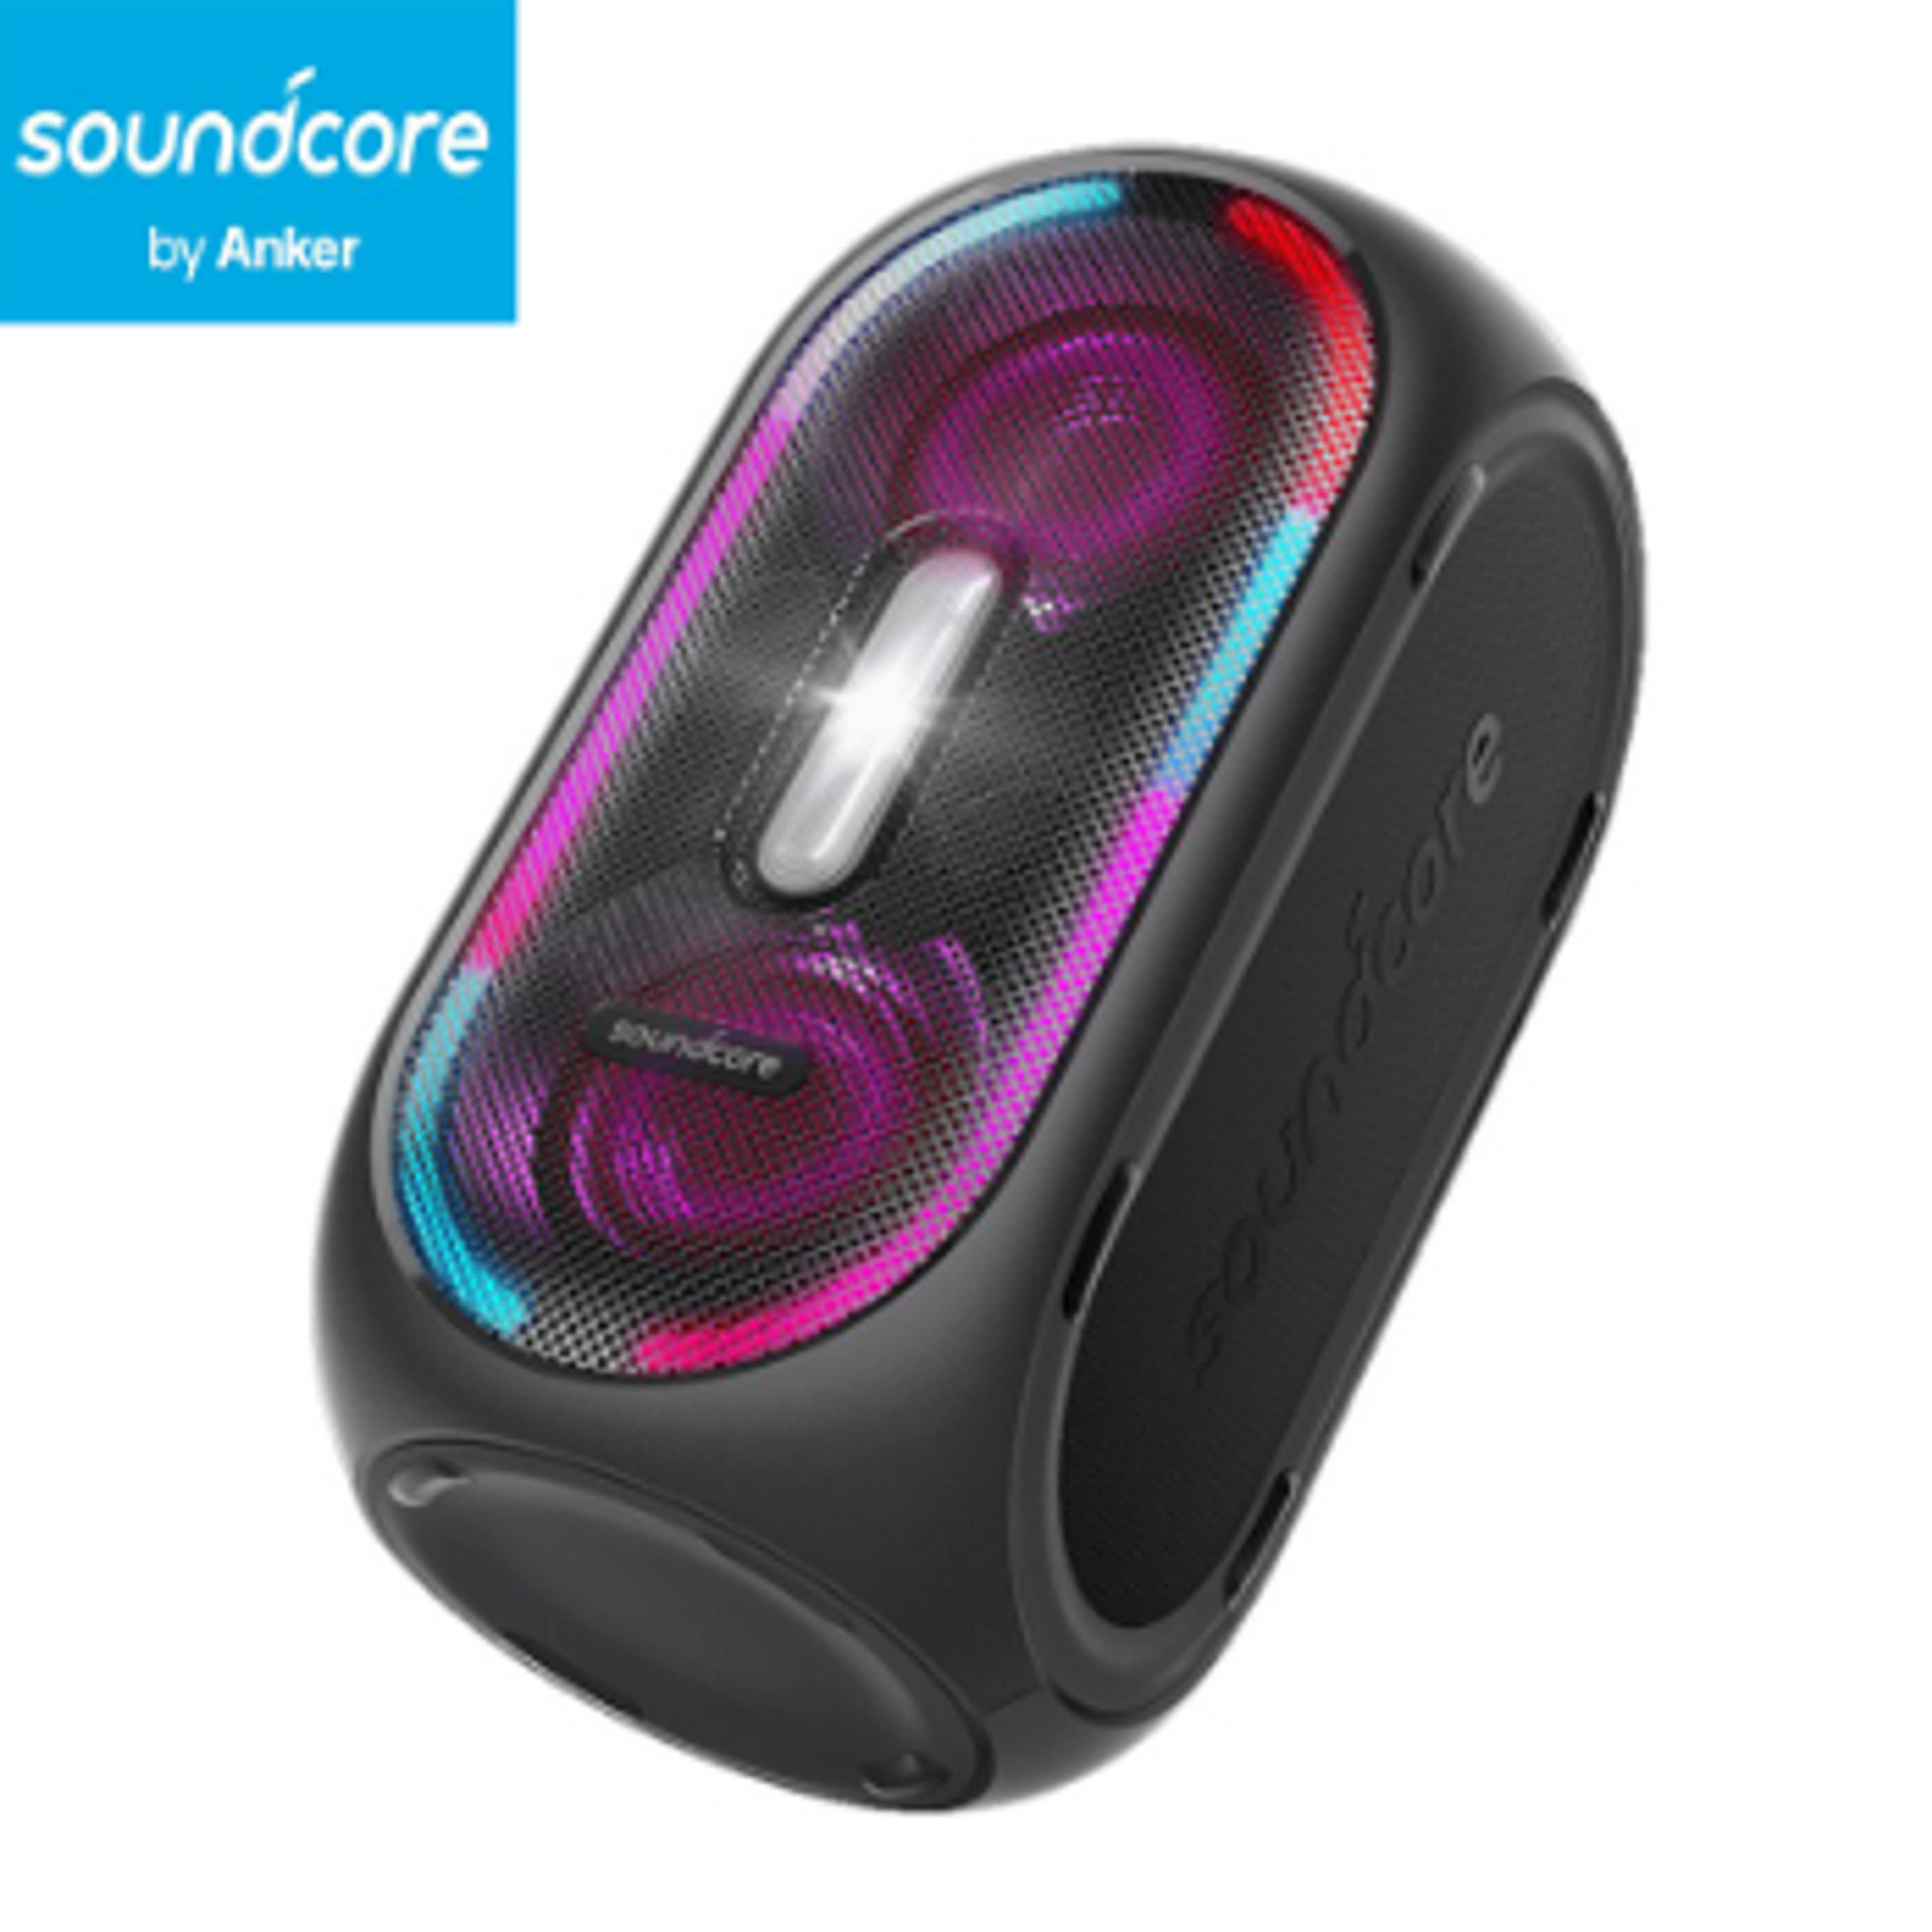 Anker A3391Z11 - SoundCore Rave Speaker Working on Power Only- 160W